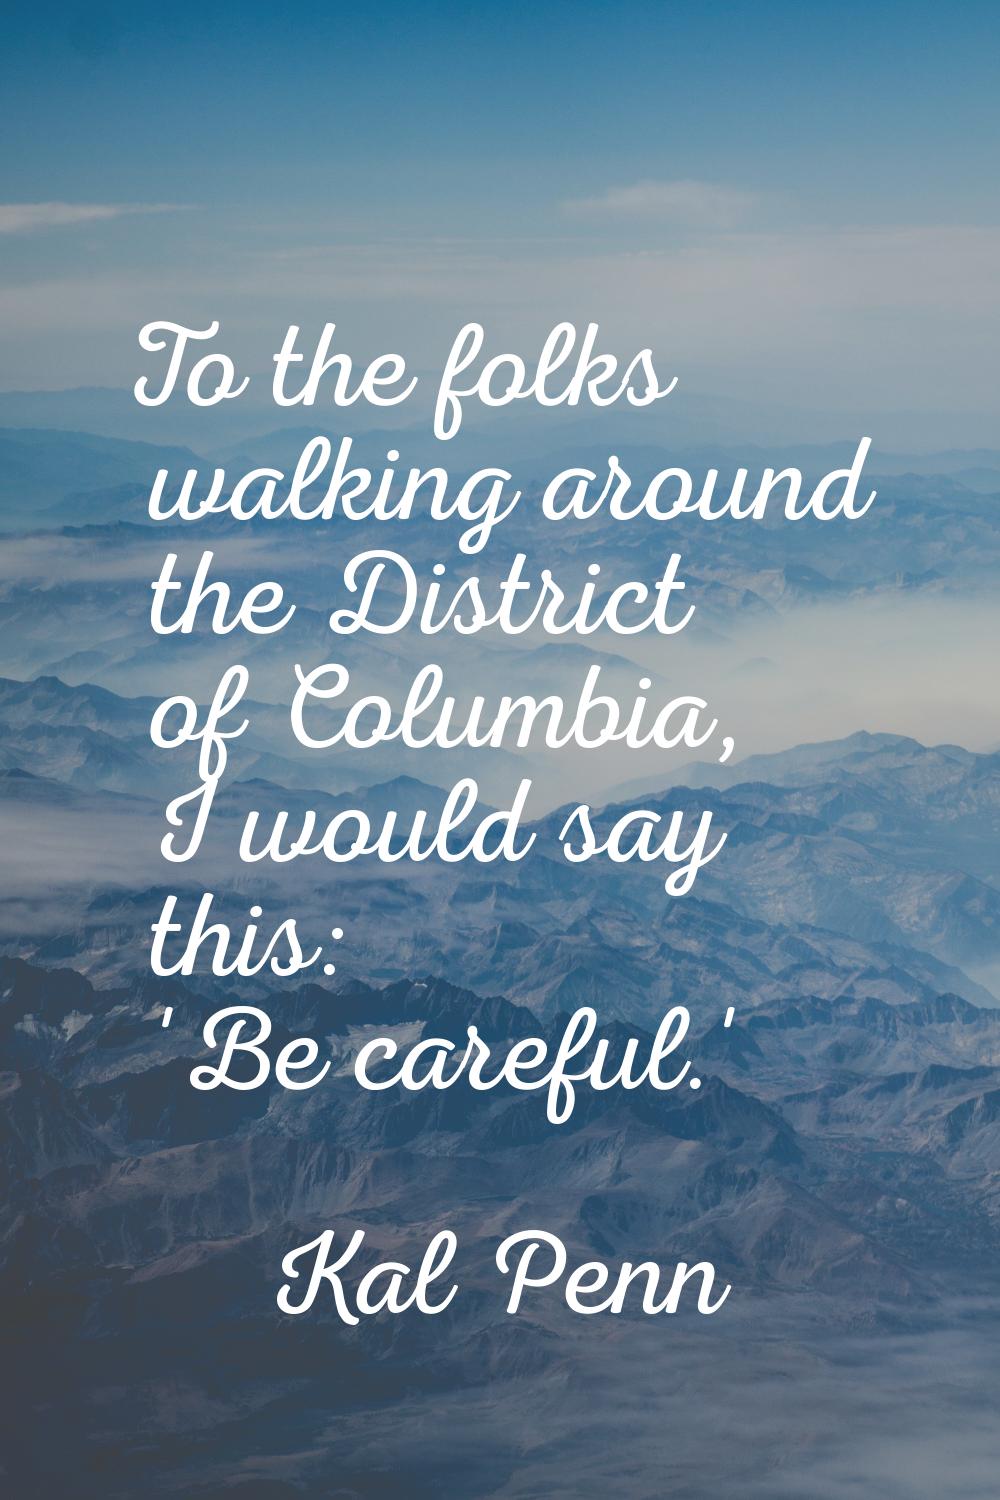 To the folks walking around the District of Columbia, I would say this: 'Be careful.'